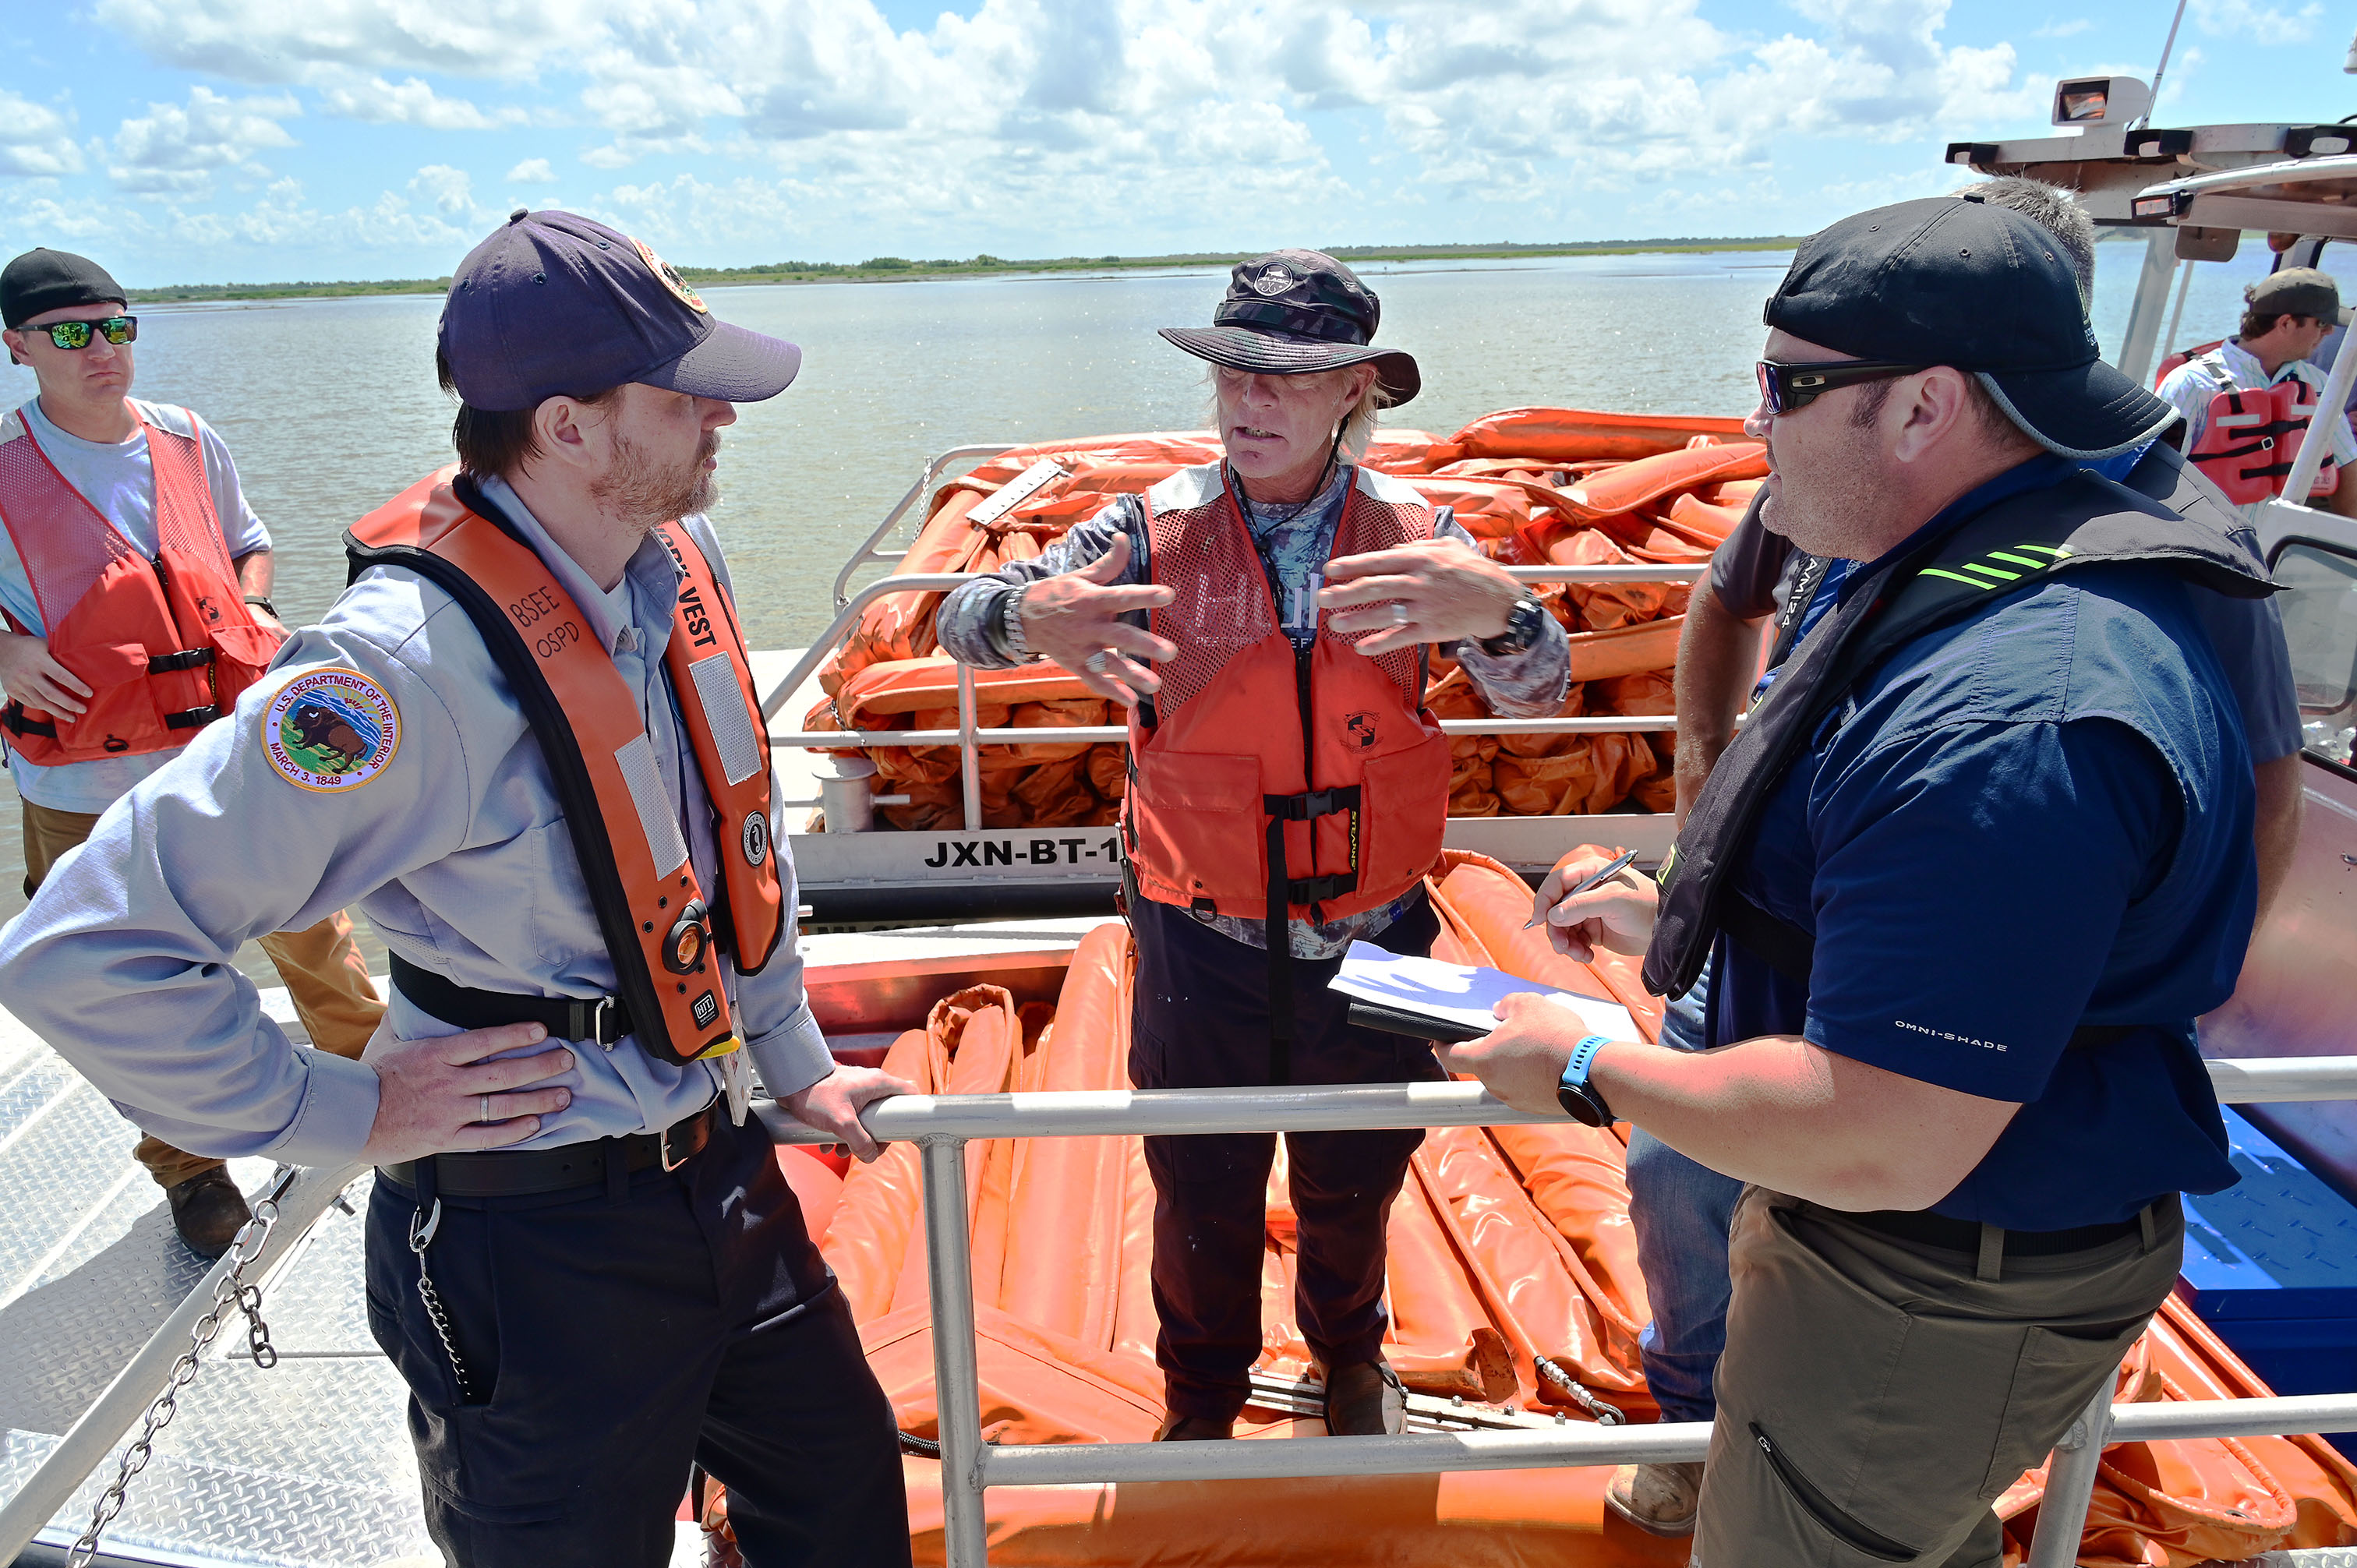 John Calvin, a senior preparedness analyst in the Bureau of Safety and Environmental Enforcement’s Gulf Regional Office of Safety and Preparedness Division, discusses containment boom deployment strategies with a member of E3 Environmental and Equinor during a boom deployment exercise Wednesday, June 1, 2022, off the Louisiana coast. The boom deployment was the physical verification of Equinor’s response strategy in case of an actual emergency as part of a government initiated unannounced exercise conducted by BSEE.